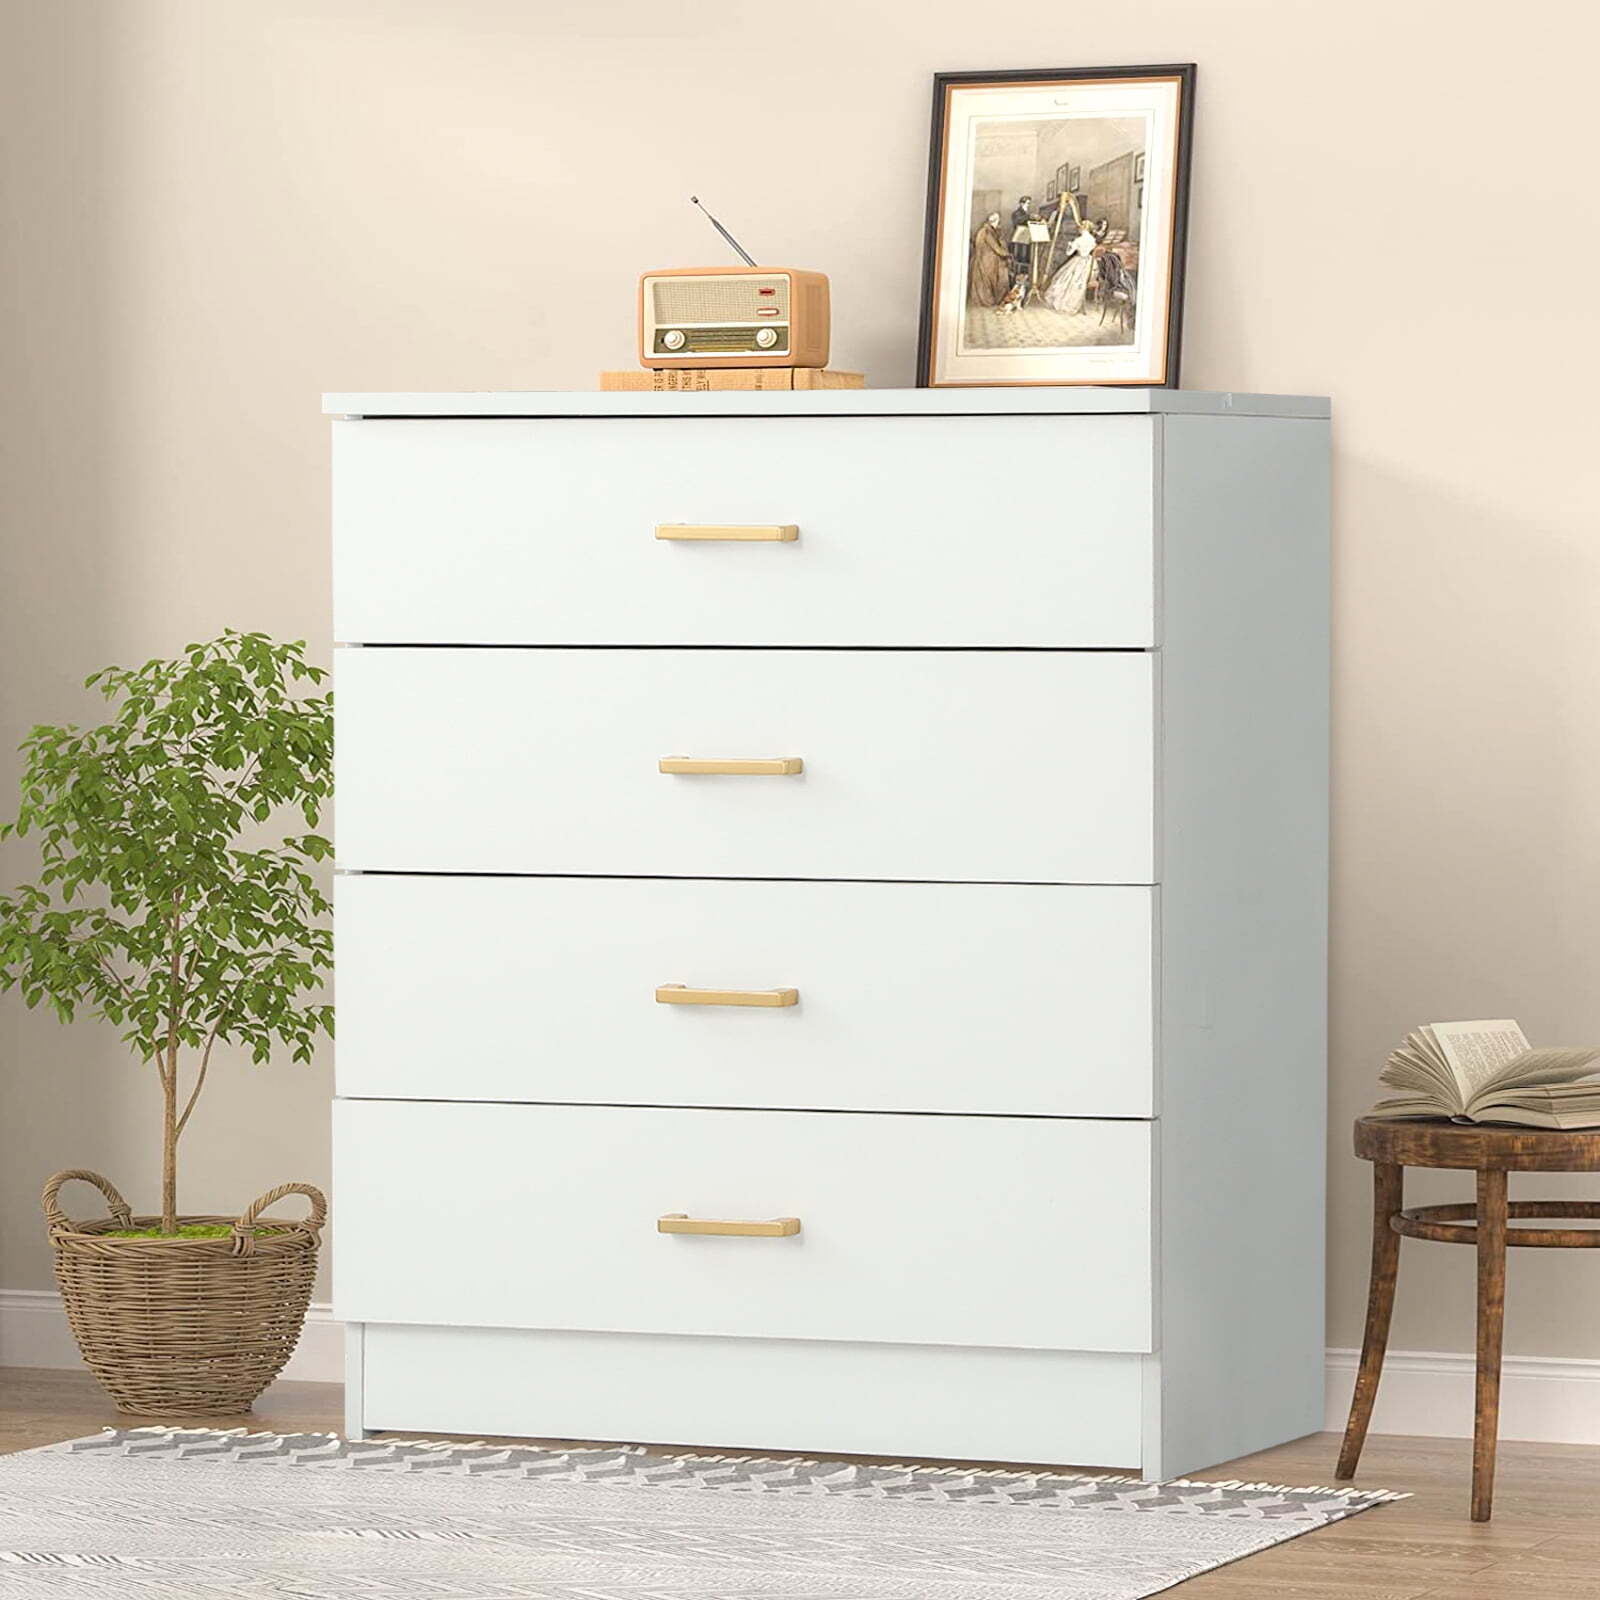 White 4-Drawer Wood Dressers for Bedroom - image 2 of 7